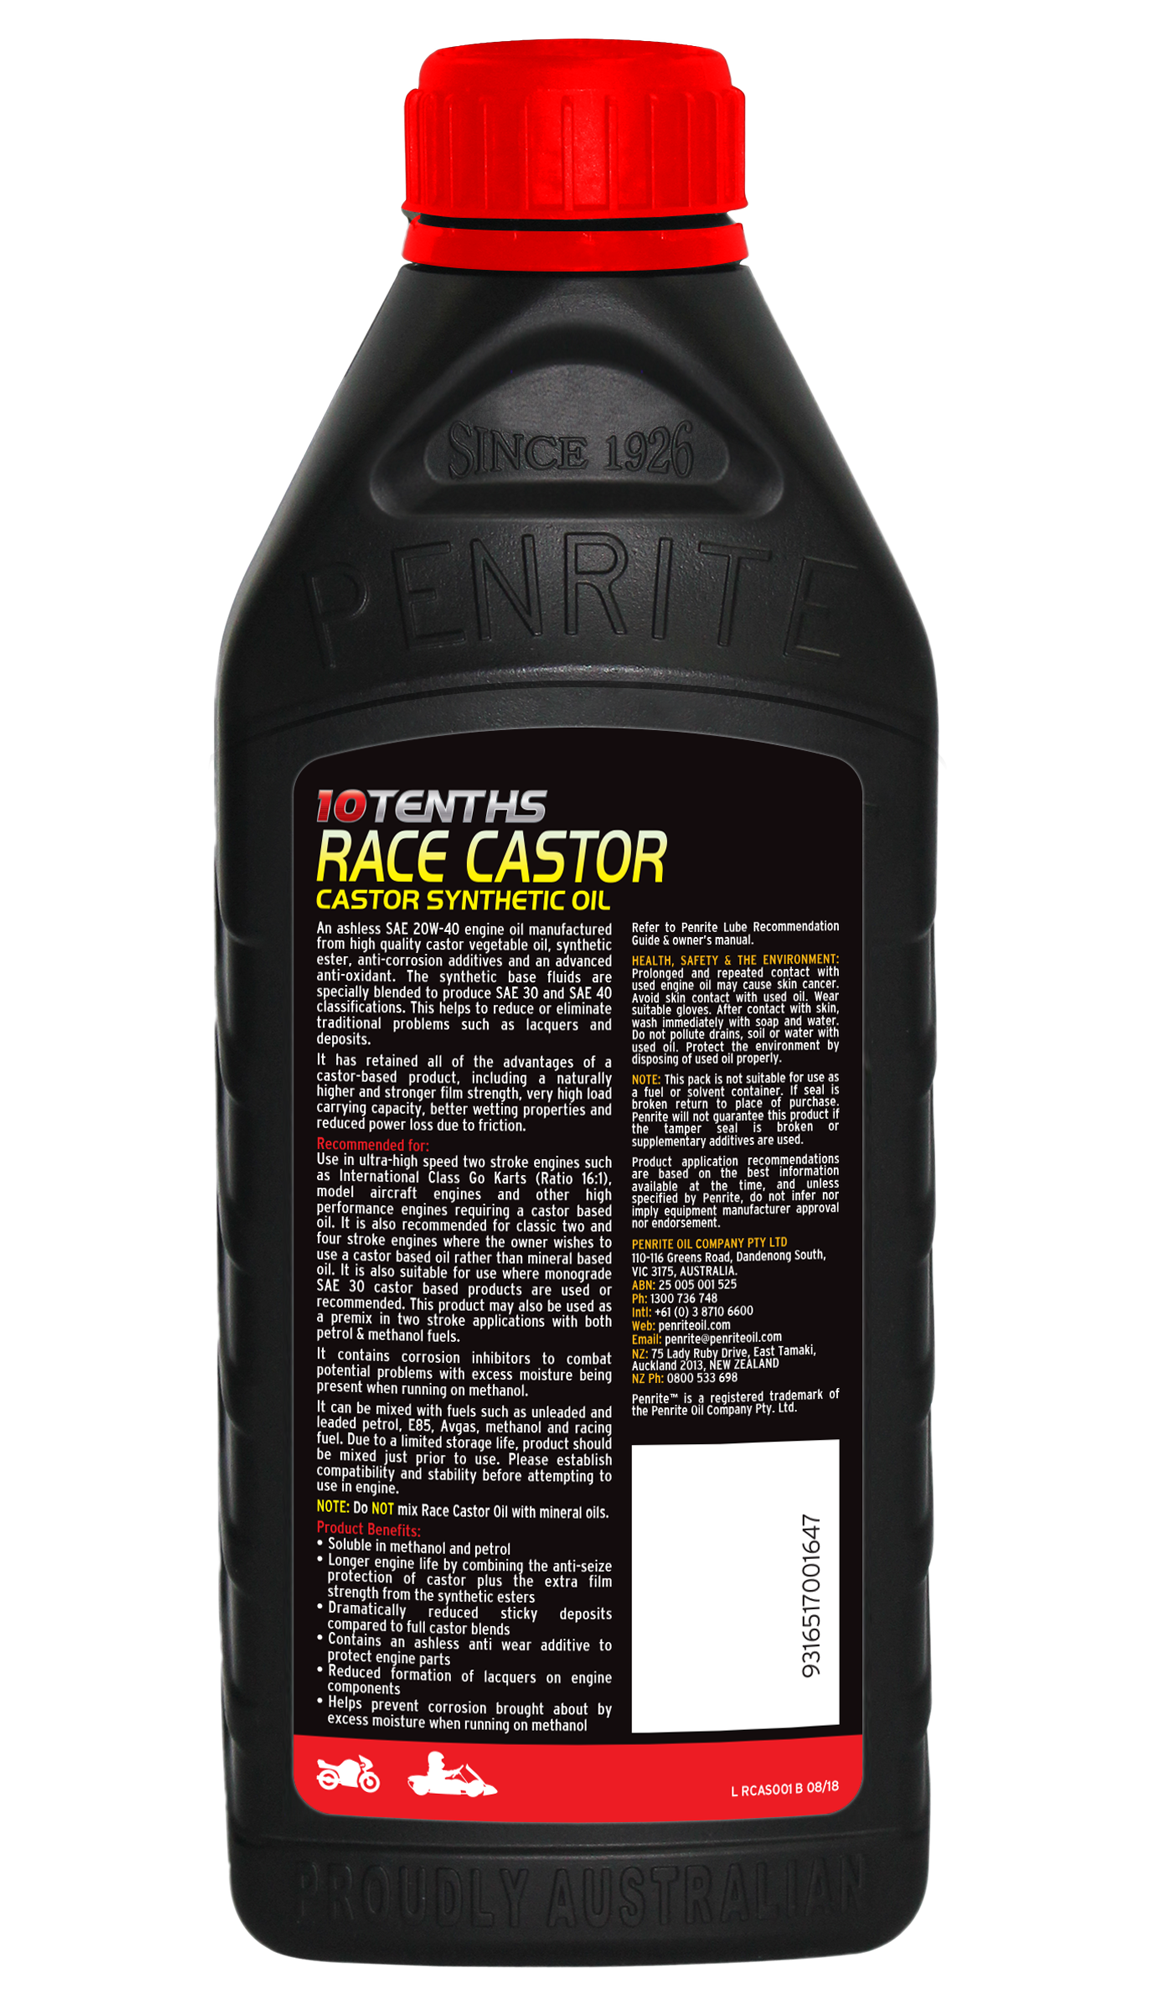 10 Tenths Race Castor Oil 20W-40 (Full Synthetic) - Penrite | Universal Auto Spares